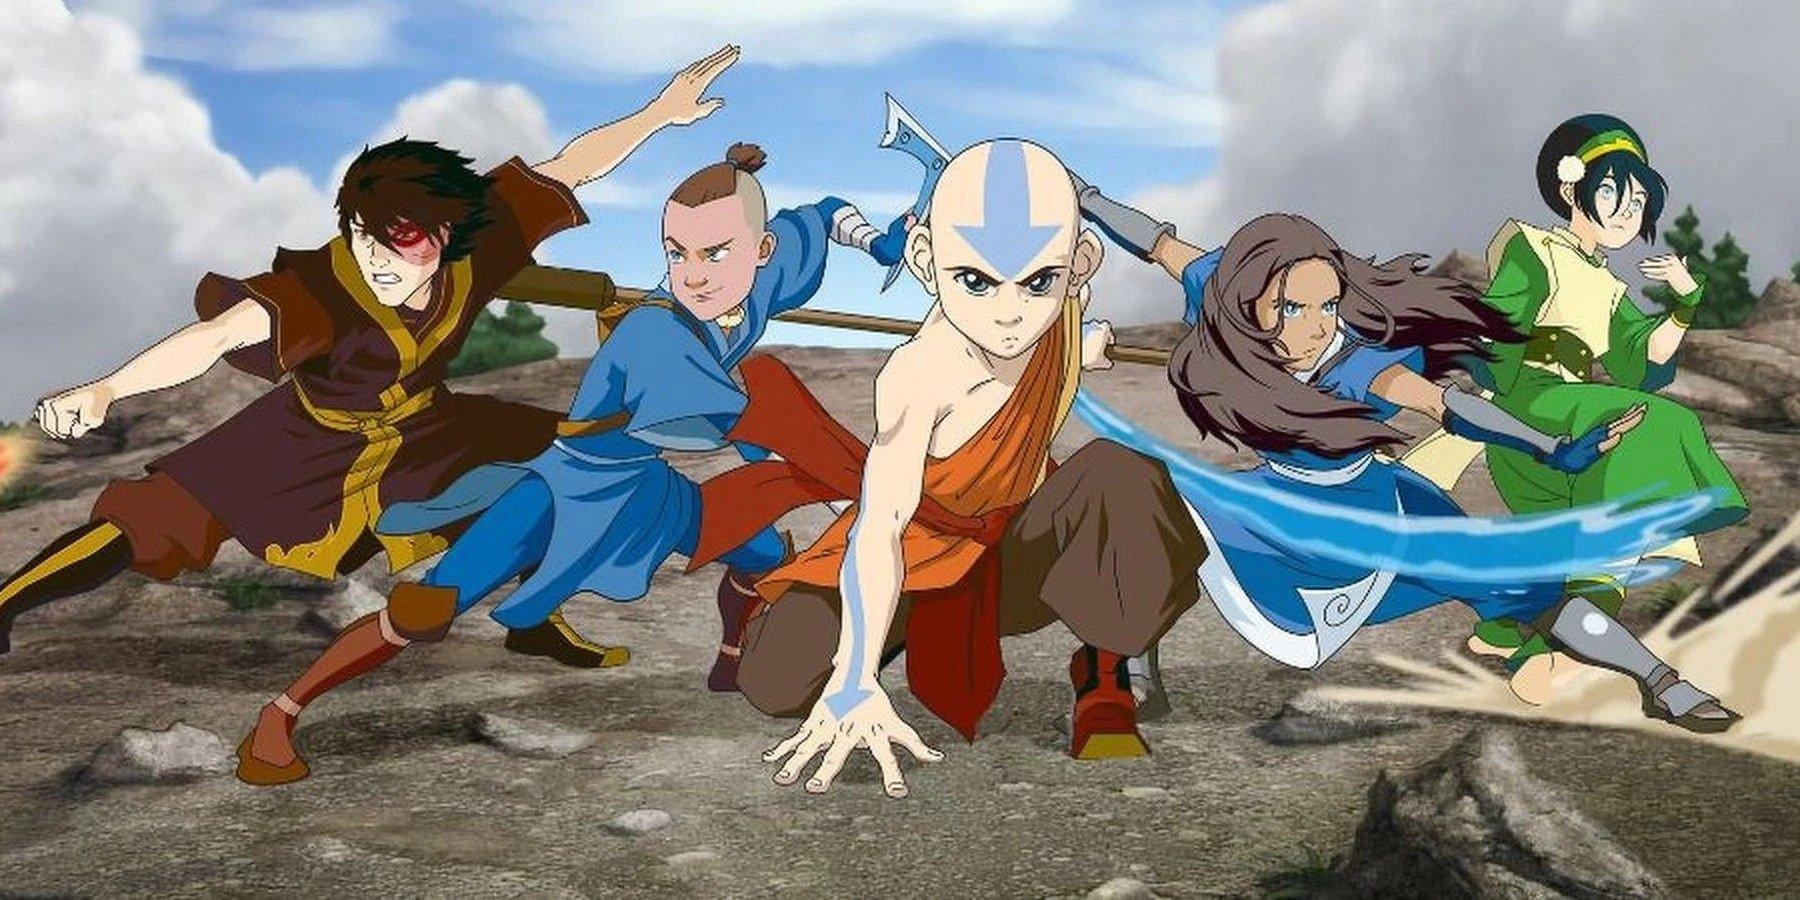 Smash Hit Nickelodeon’s Franchise Avatar: The Last Airbender takes the ...